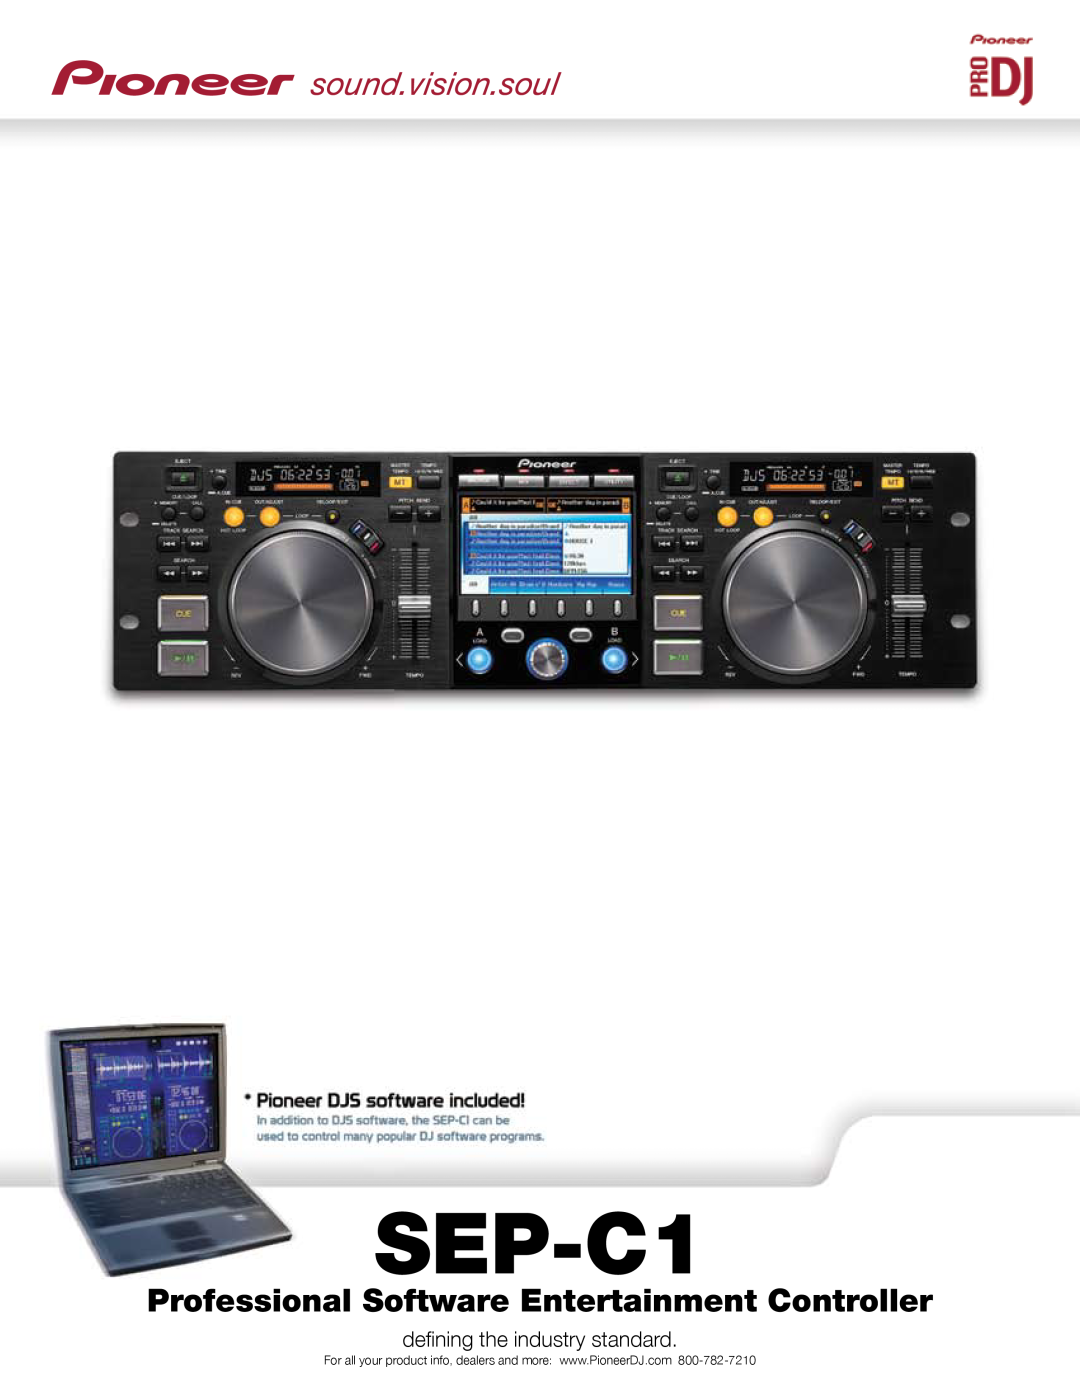 Pioneer SEP-C1 manual Professional Software Entertainment Controller, defining the industry standard 